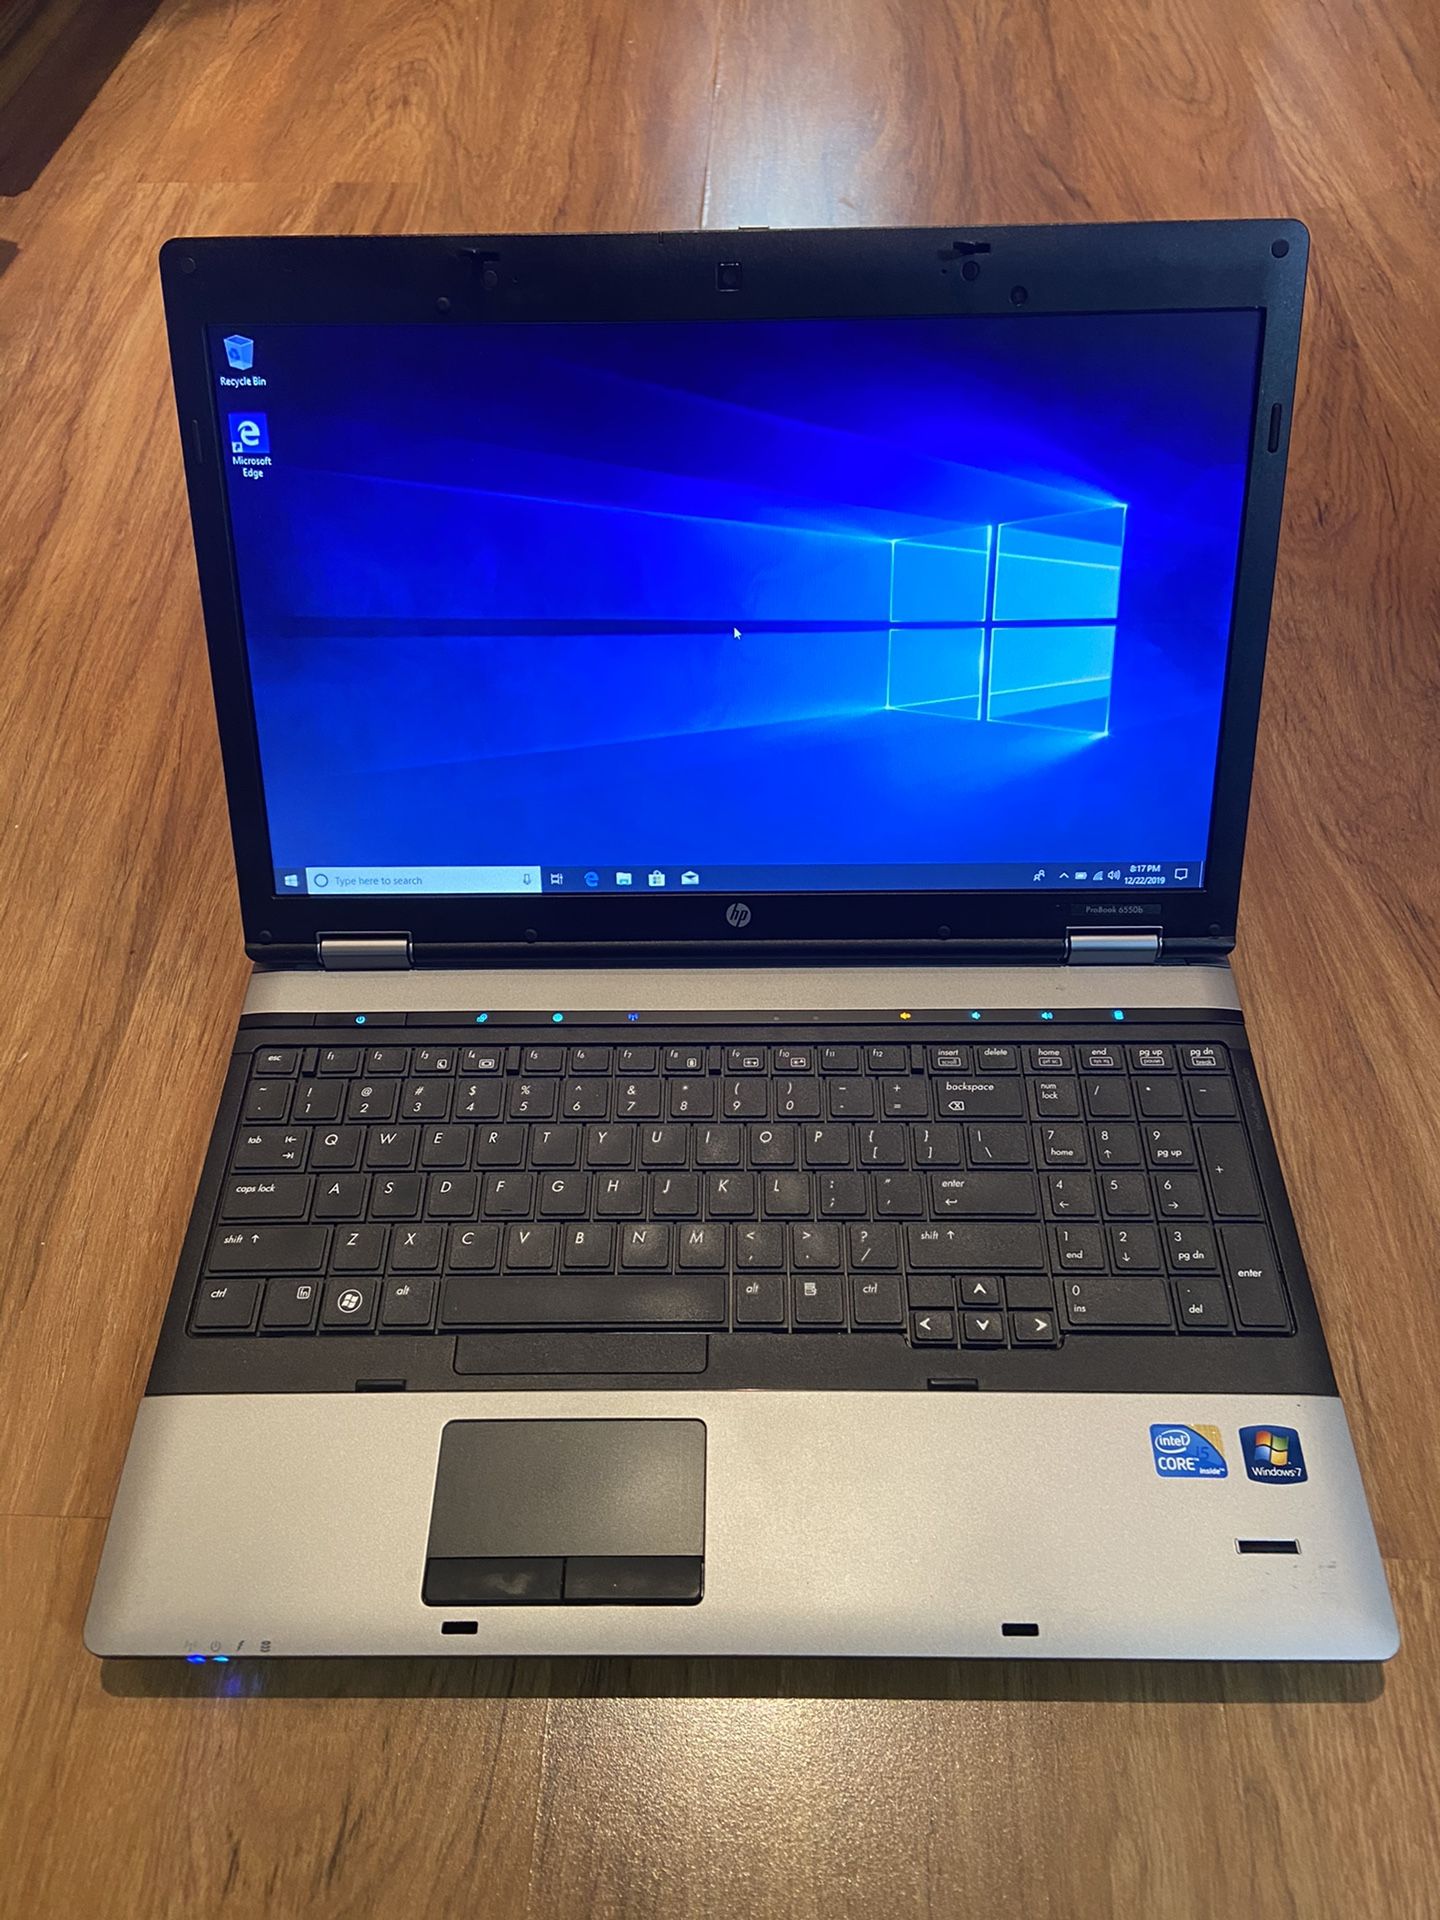 HP ProBook 6550b core i5 4GB Ram 250GB Hard Drive 15.6 inch Screen Windows 10 Pro Laptop with charger in Excellent Working condition!!!!!!!